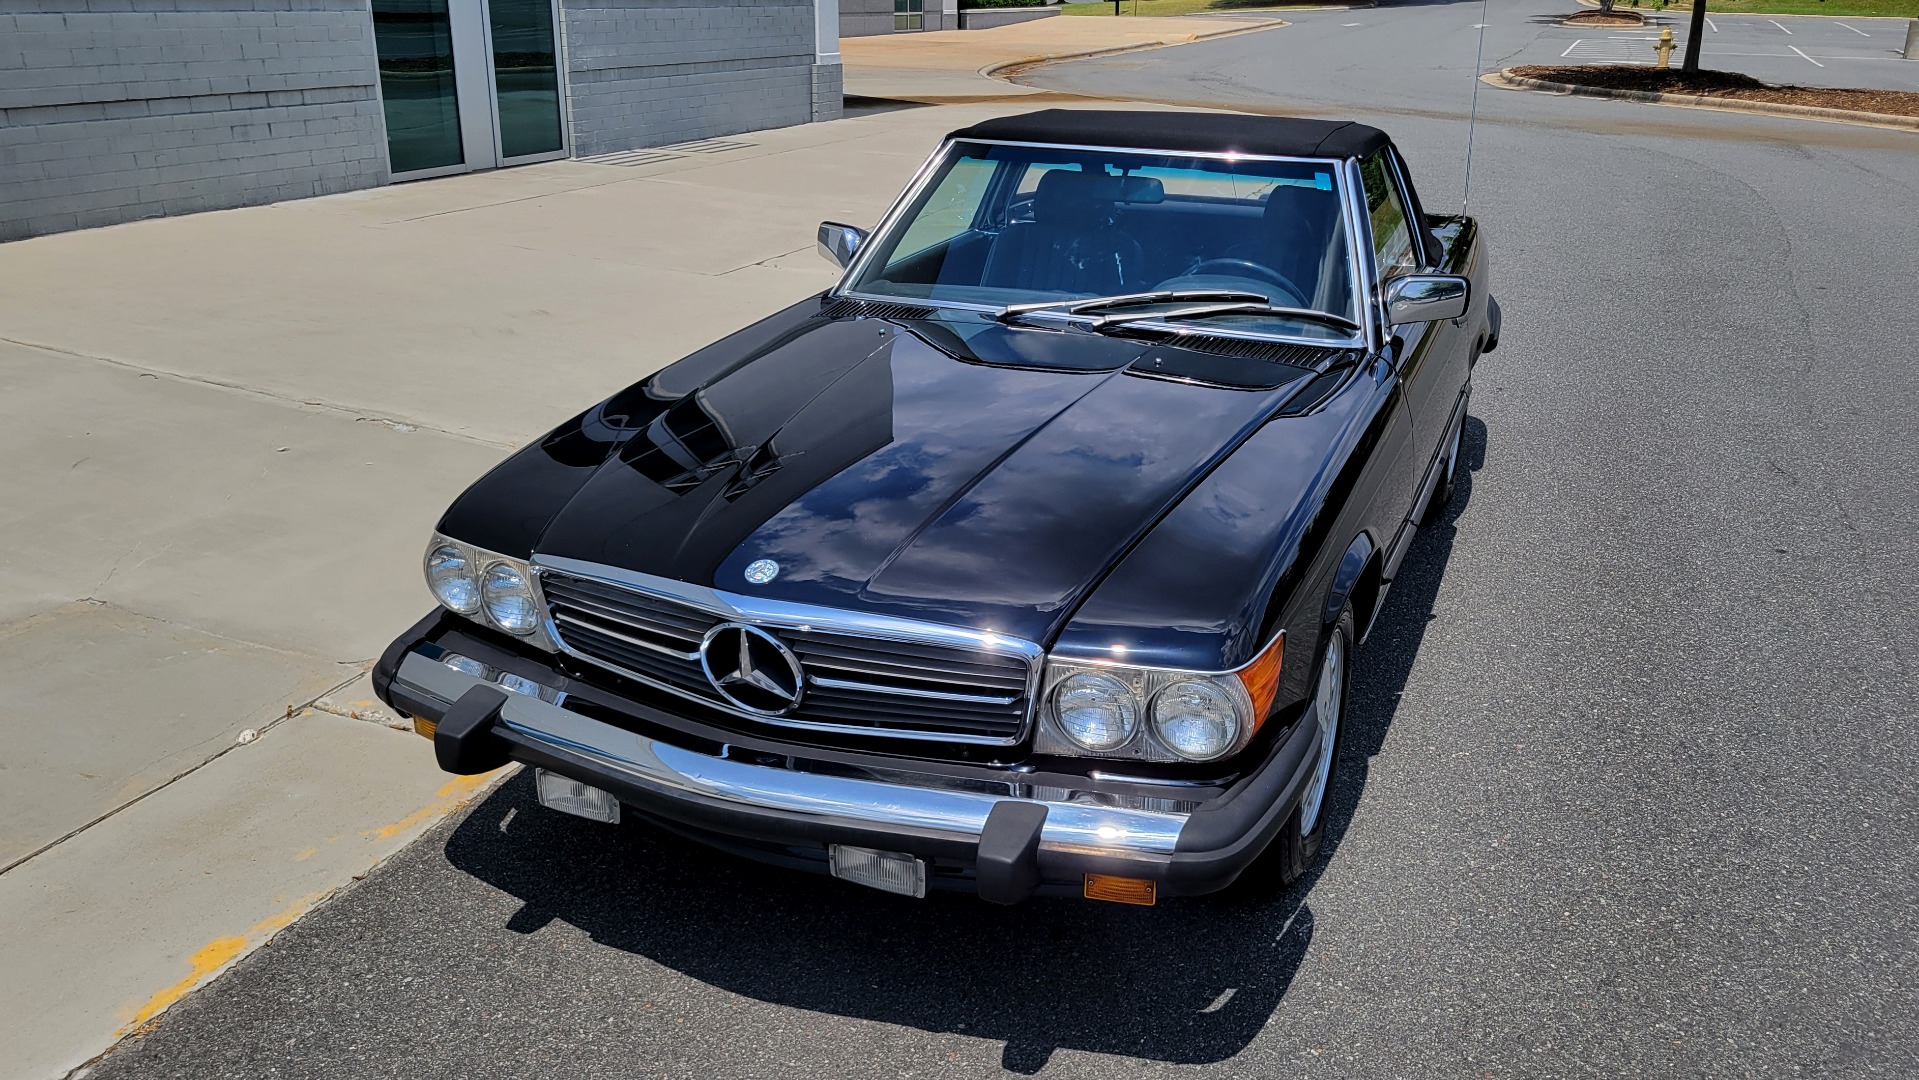 Used 1989 Mercedes-Benz 560 SERIES 560SL ROADSTER / 5.6L V8 227HP / AUTOMATIC TRANS for sale $24,999 at Formula Imports in Charlotte NC 28227 3